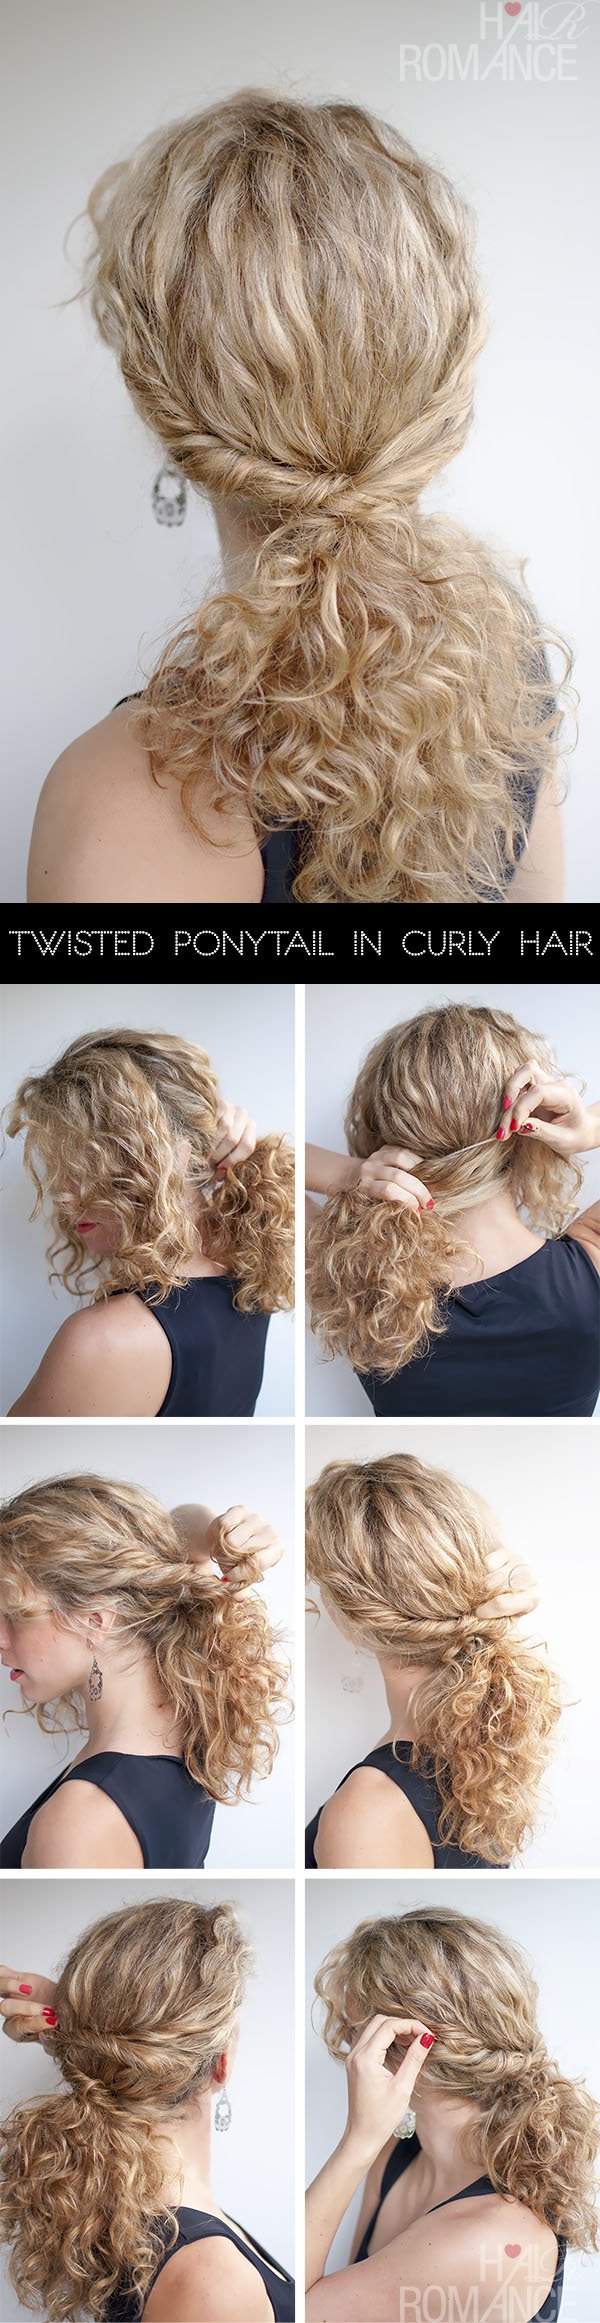 Pretty Hairstyle Tutorial for Stylish Looks - Pretty Designs